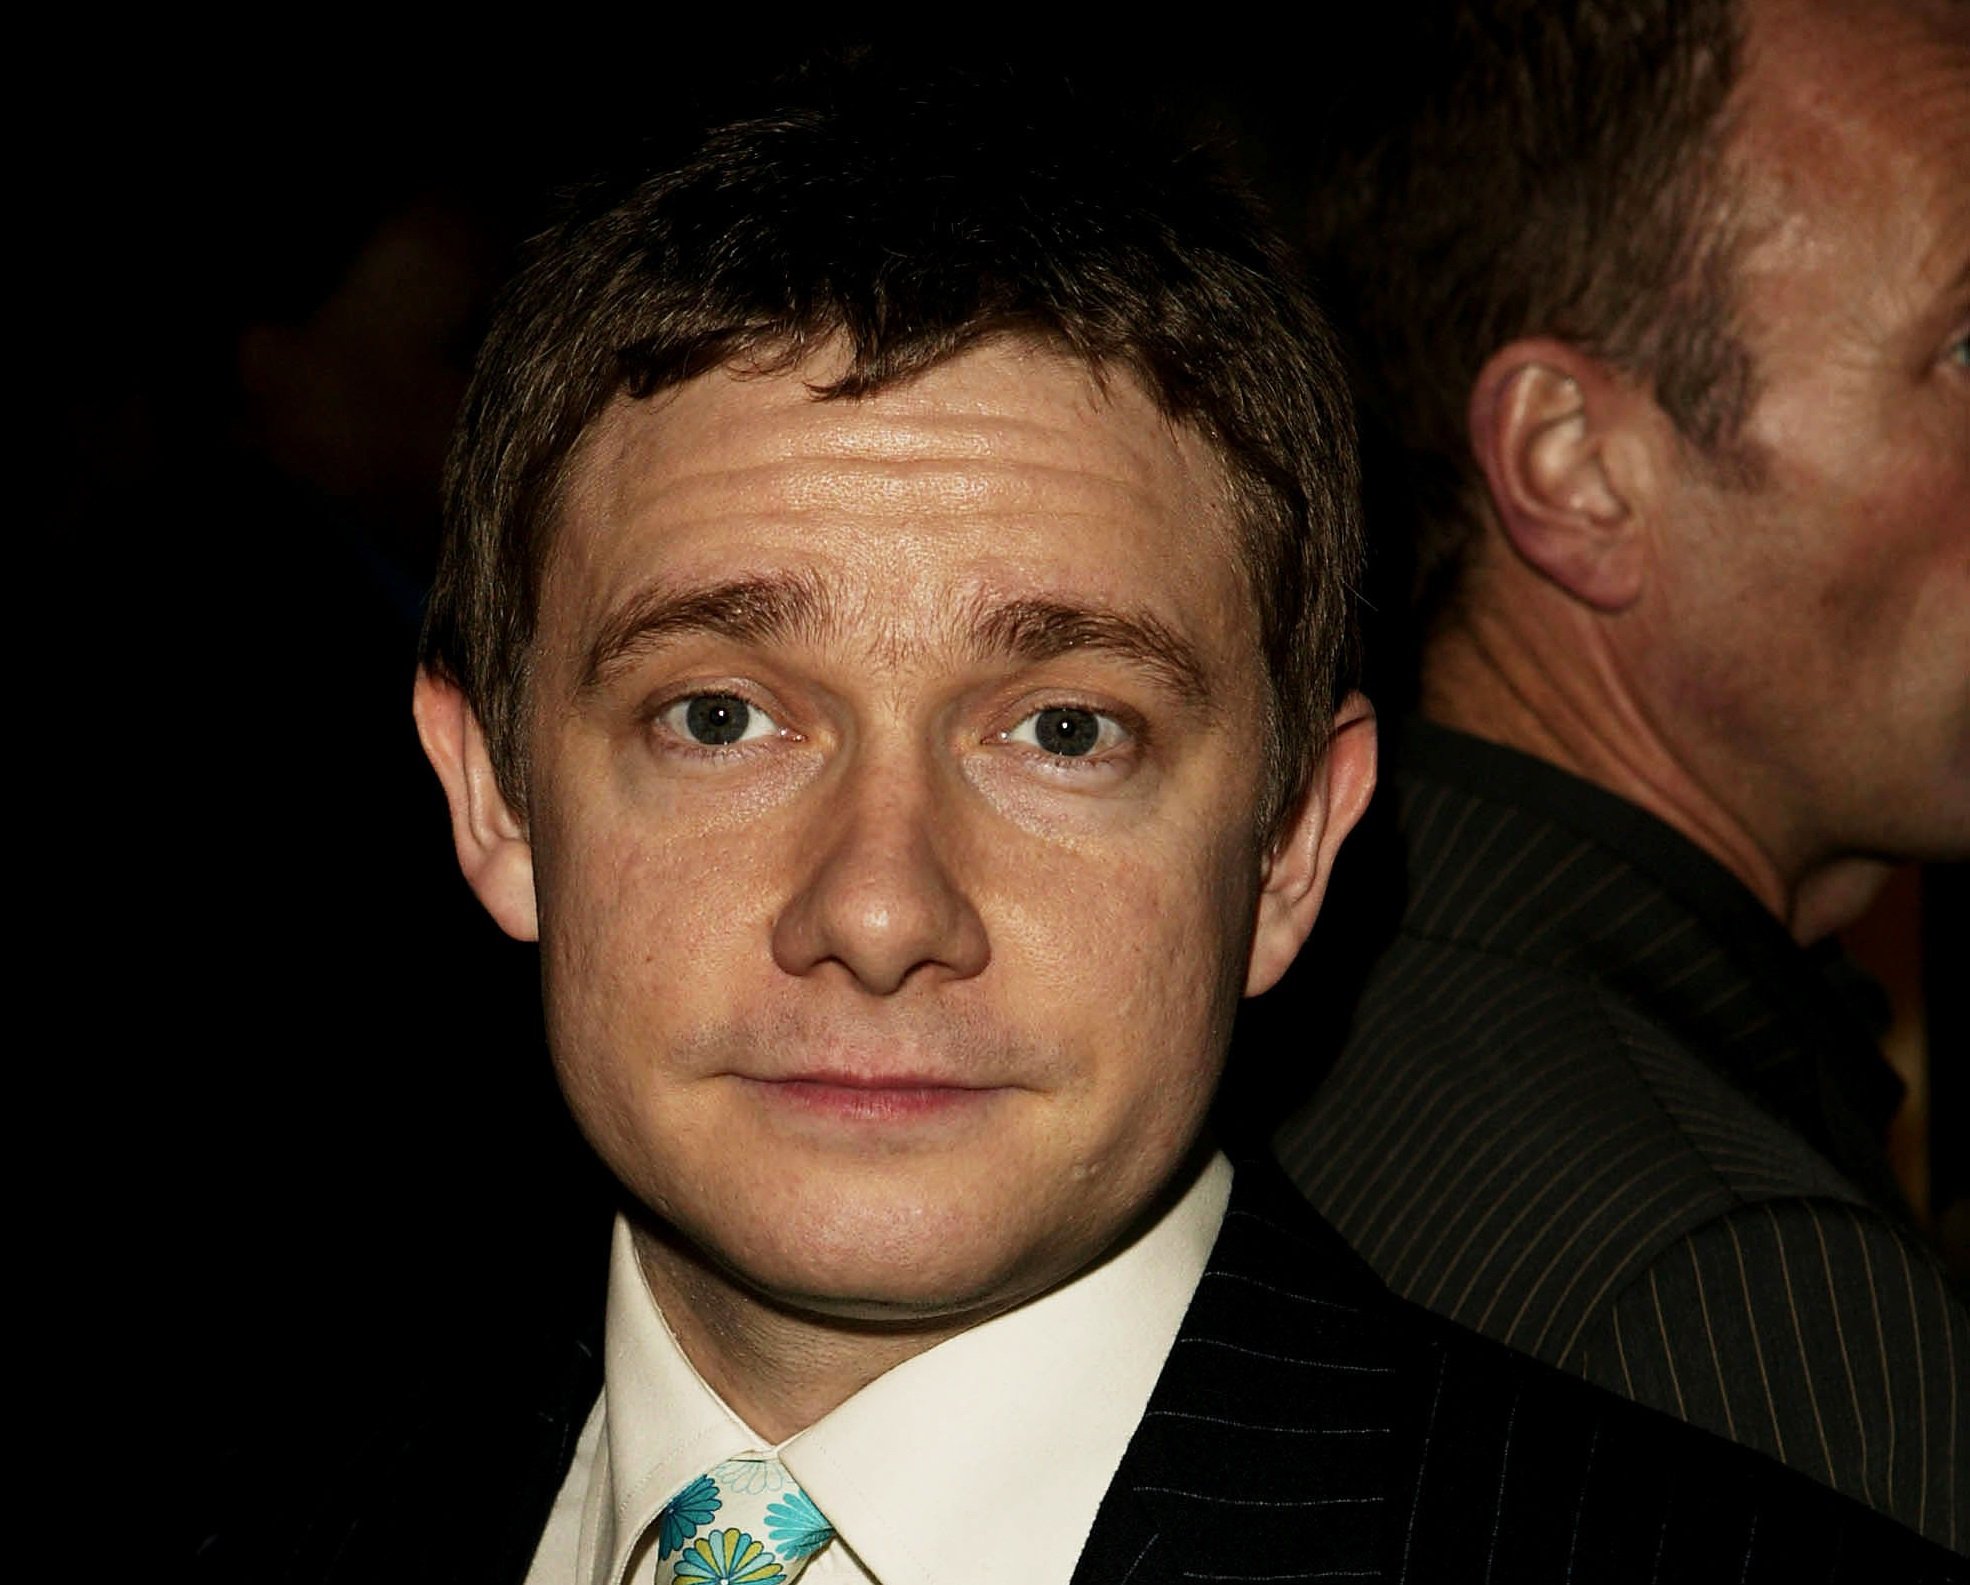 Martin Freeman attends the aftershow party for the 'Love Actually' film premiere on November 16, 2003 in London.